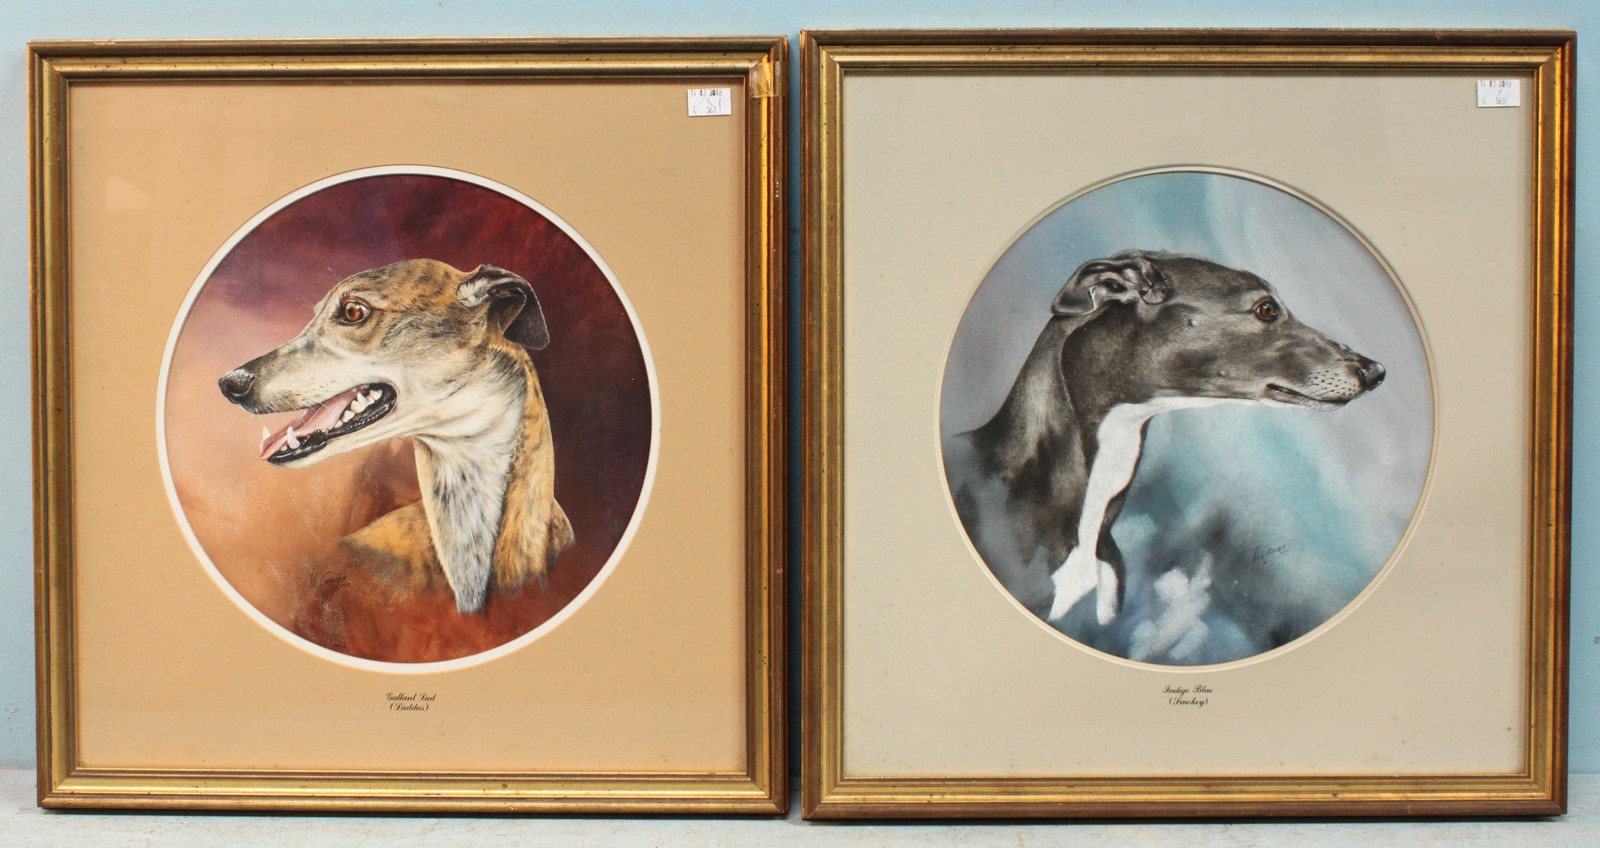 Vic Granger (British, 20th century) Two circular portrait studies of greyhounds, one titled '